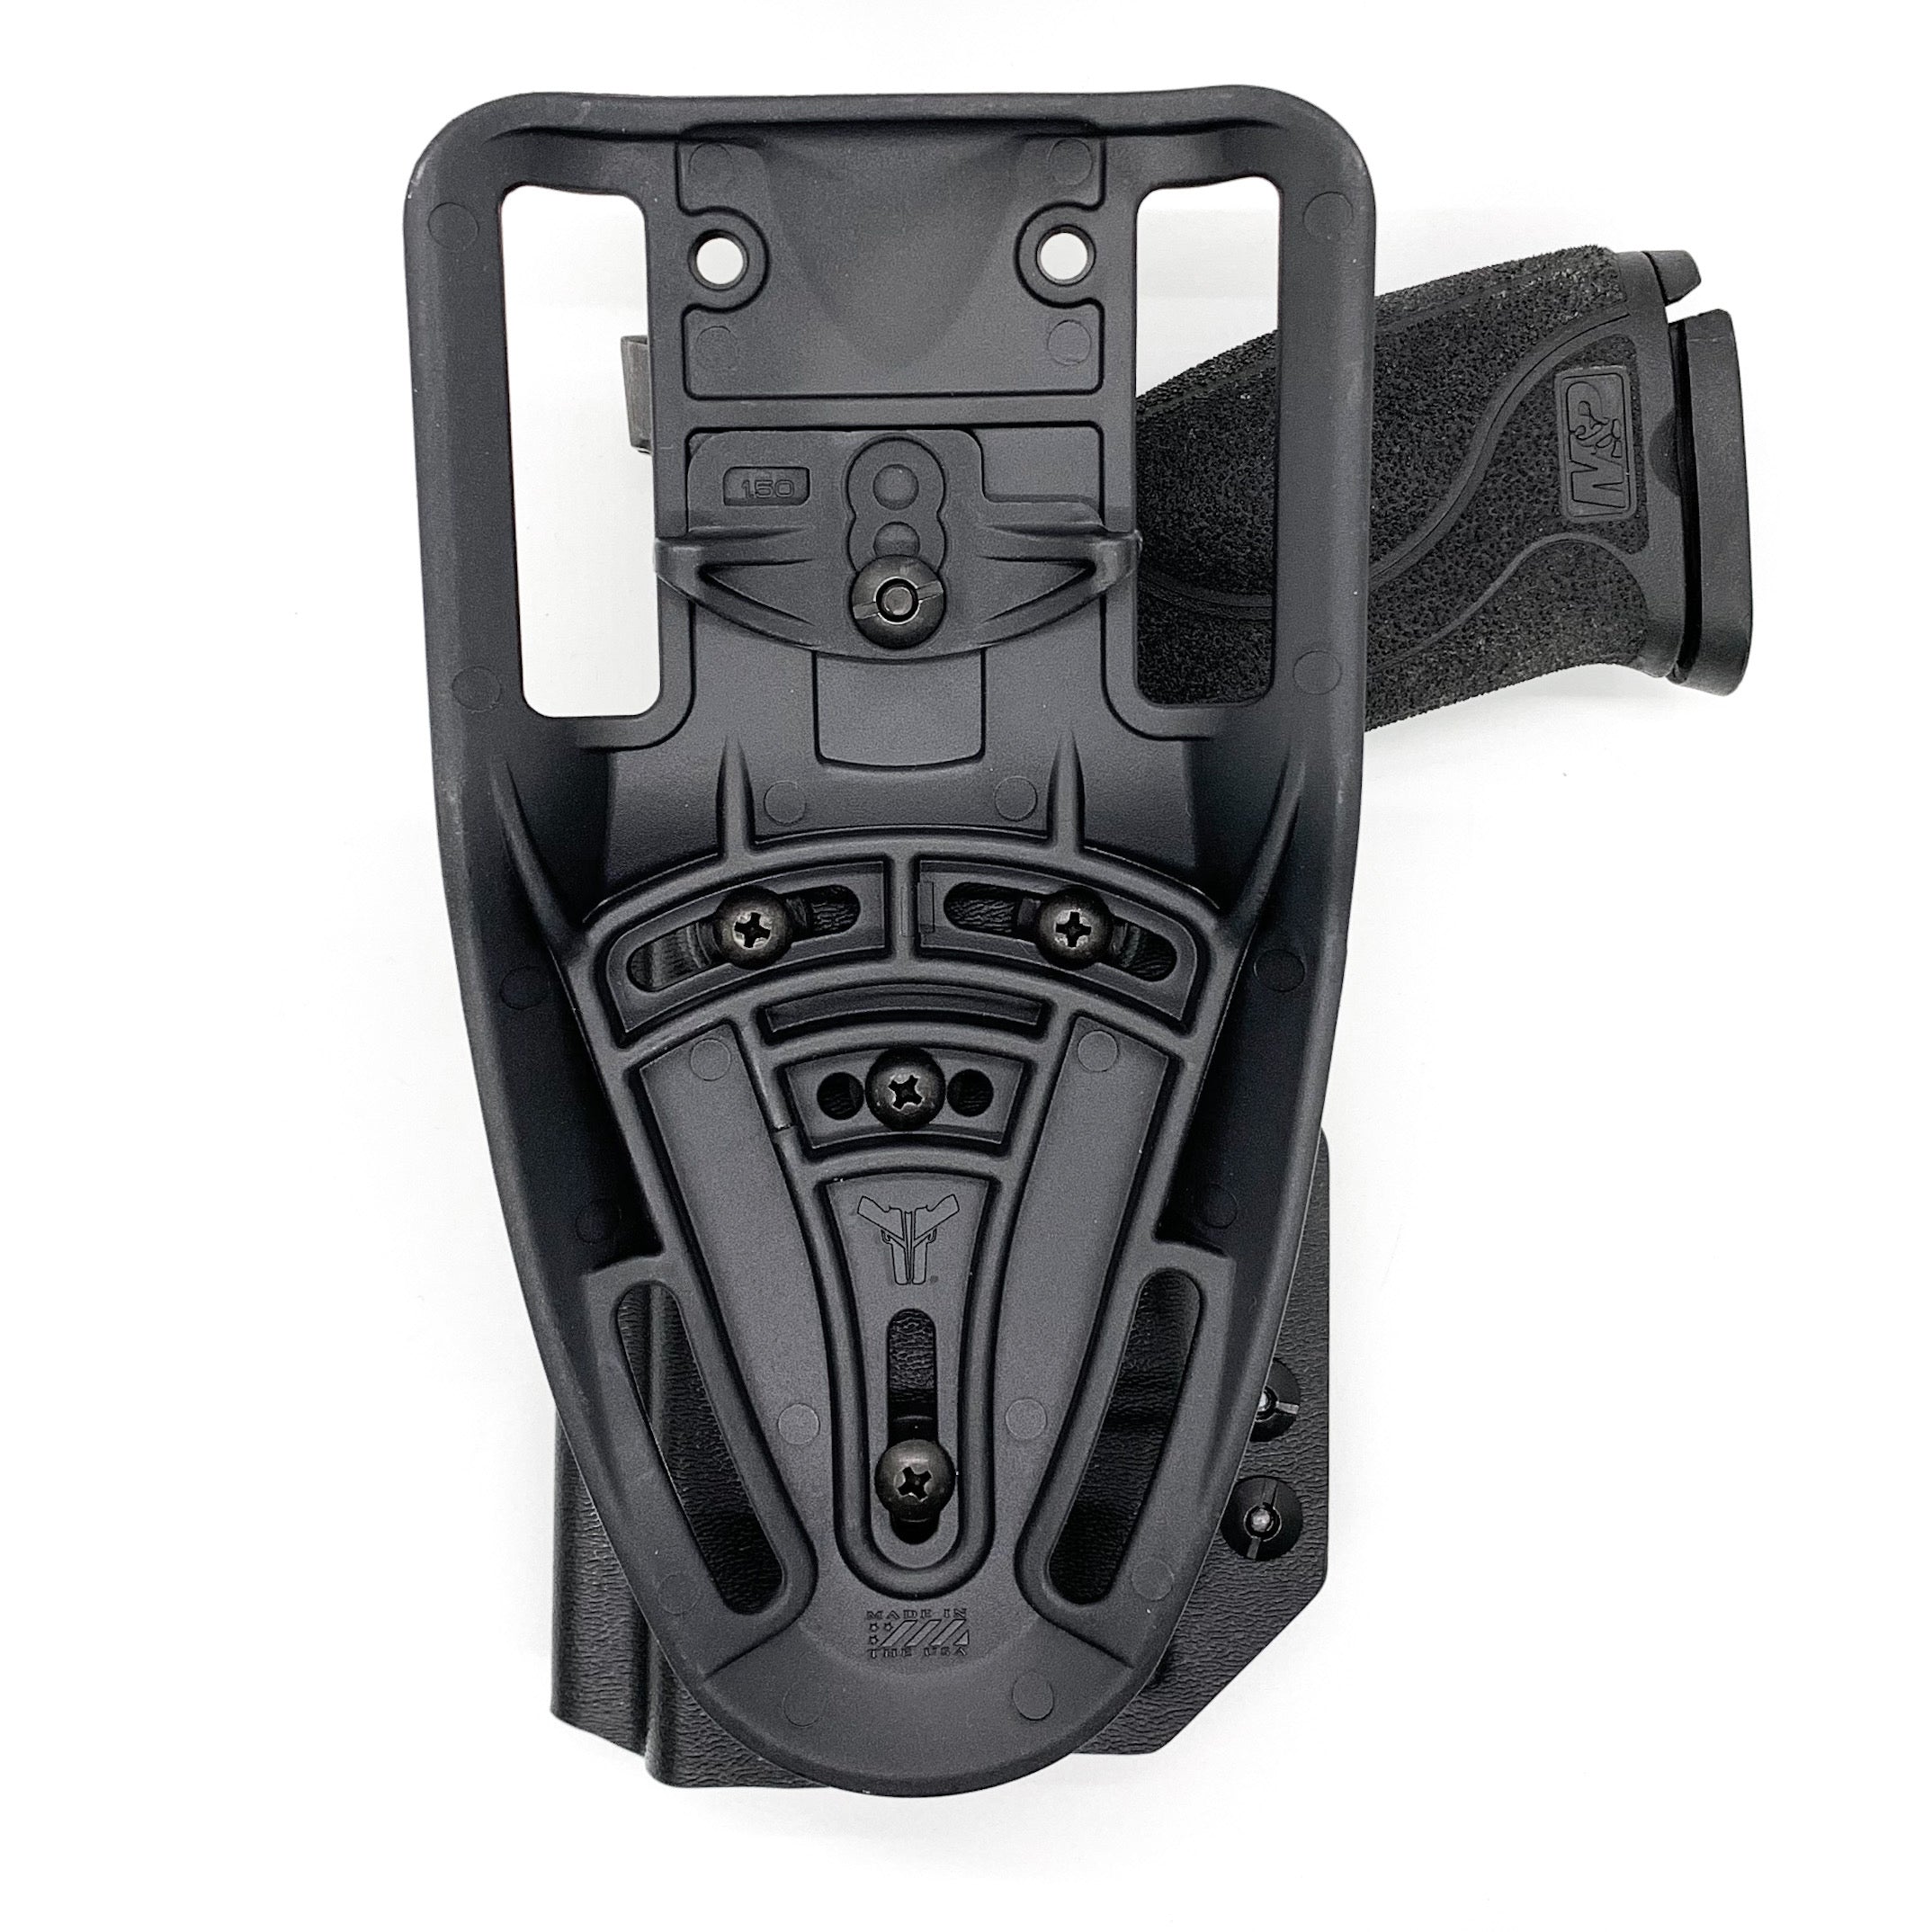 For the best Outside Waistband Kydex Duty & Competition Holster for the Smith and Wesson M&P 4" 10MM M2.0 pistol with thumb safety and Streamlight TLR-7, TLR-7A or TLR-7X shop Four Brothers Holsters.  Full sweat guard, adjustable retention, cleared for red dot sights. Made in the USA for veterans and law enforcement.